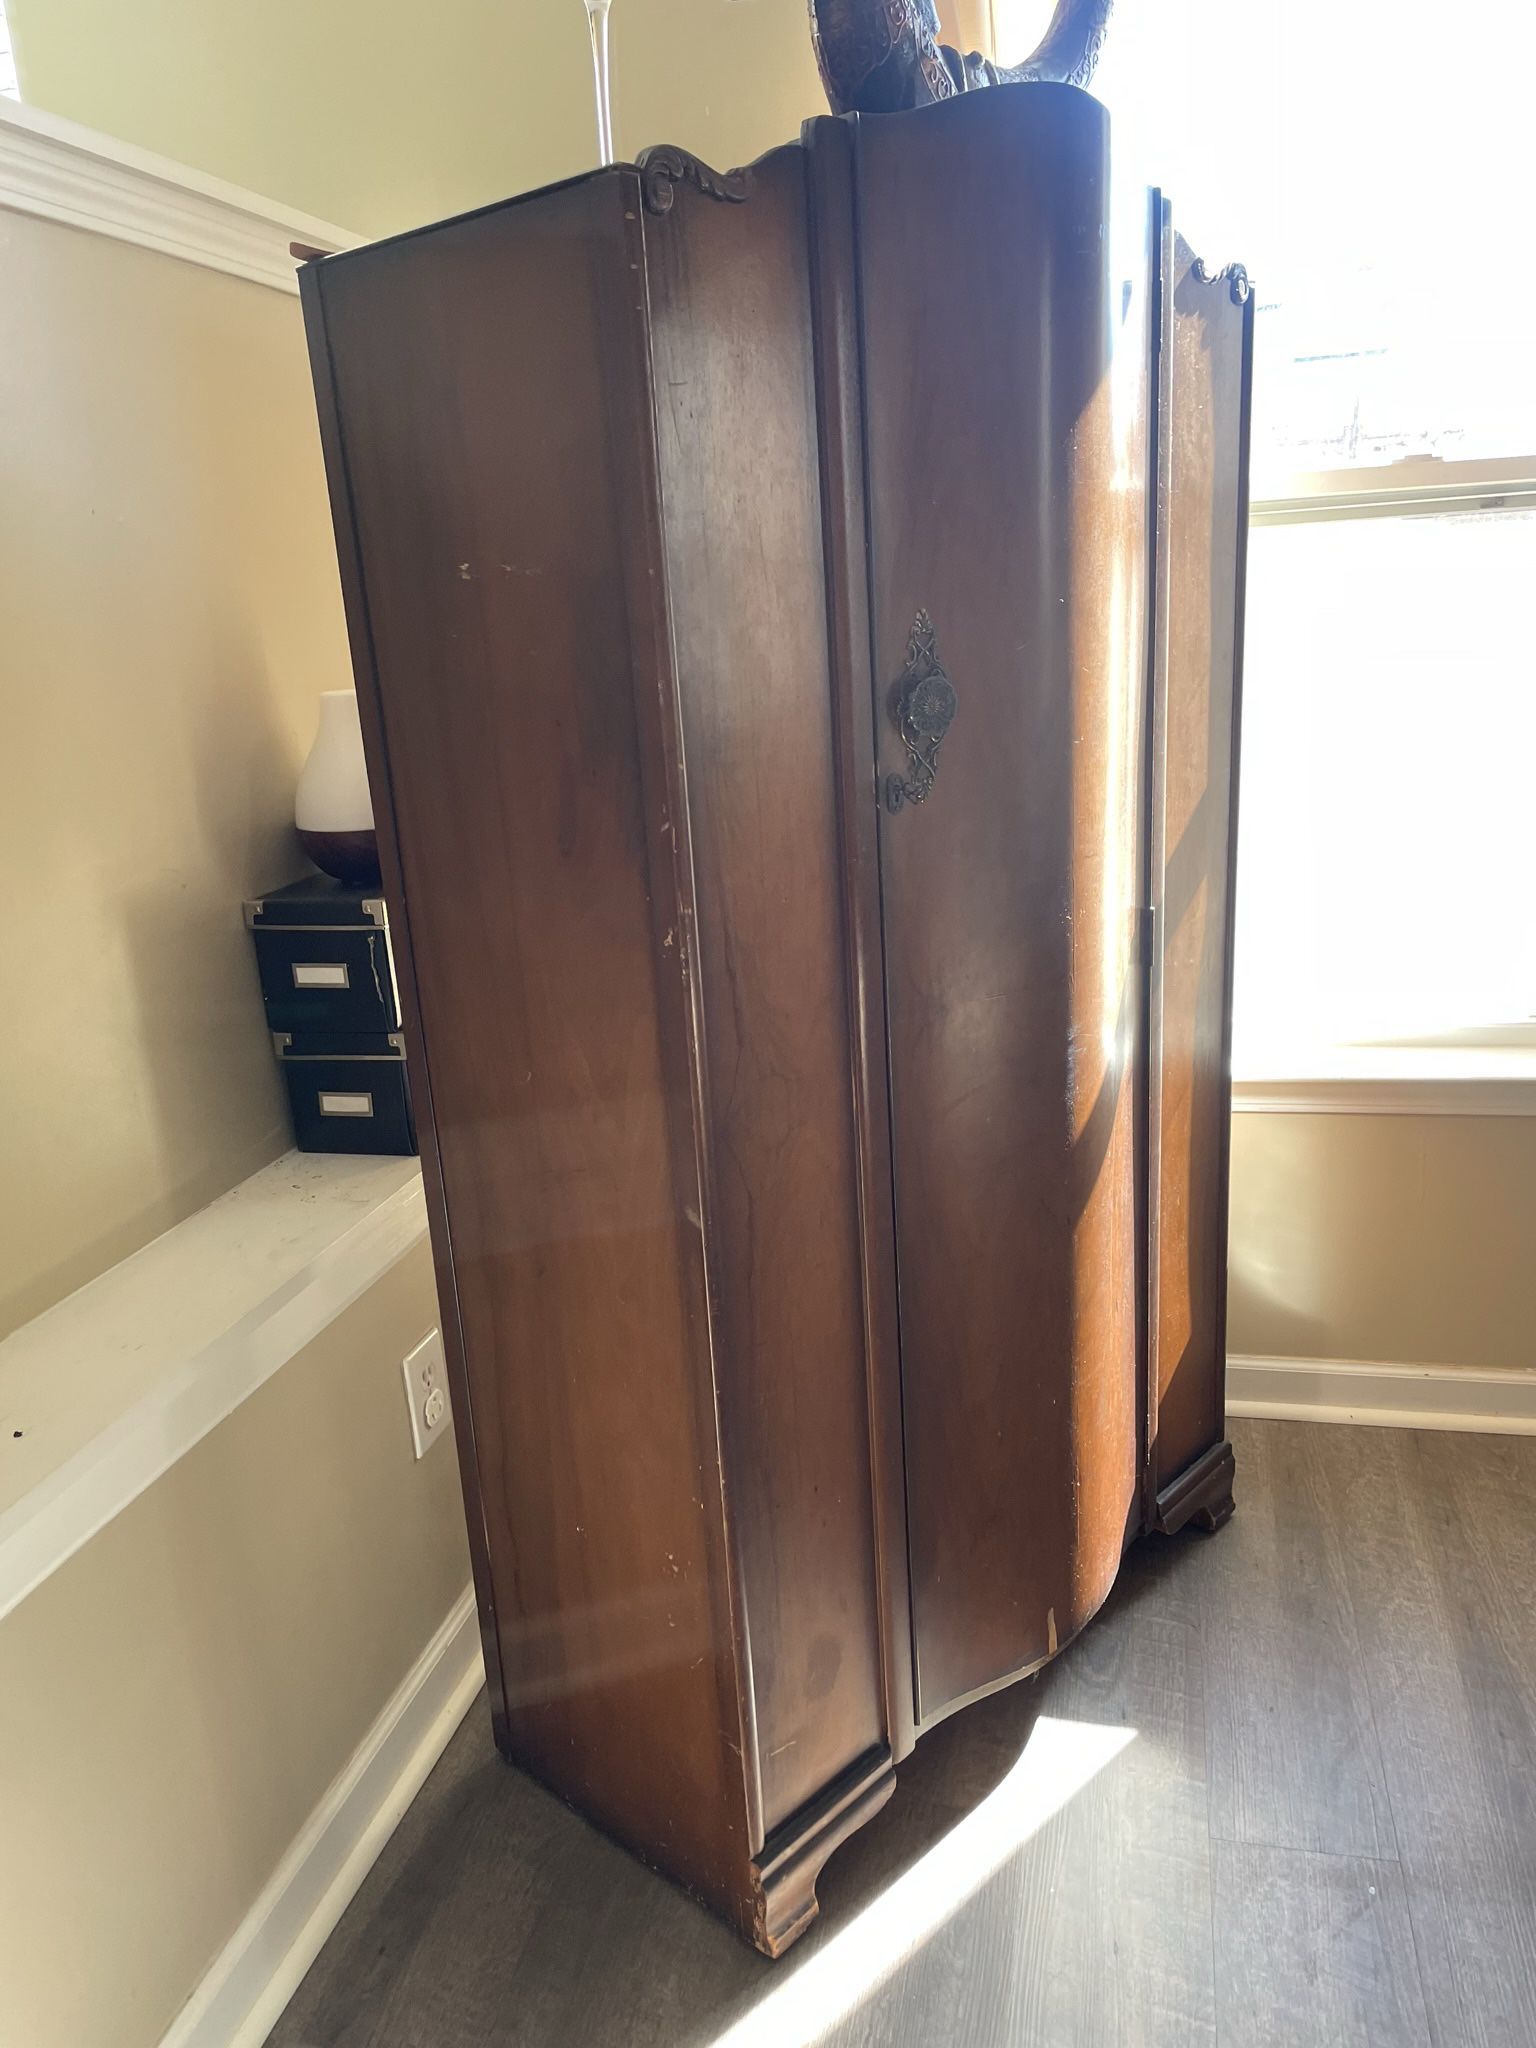  English art deco armoire made in the early 1900s